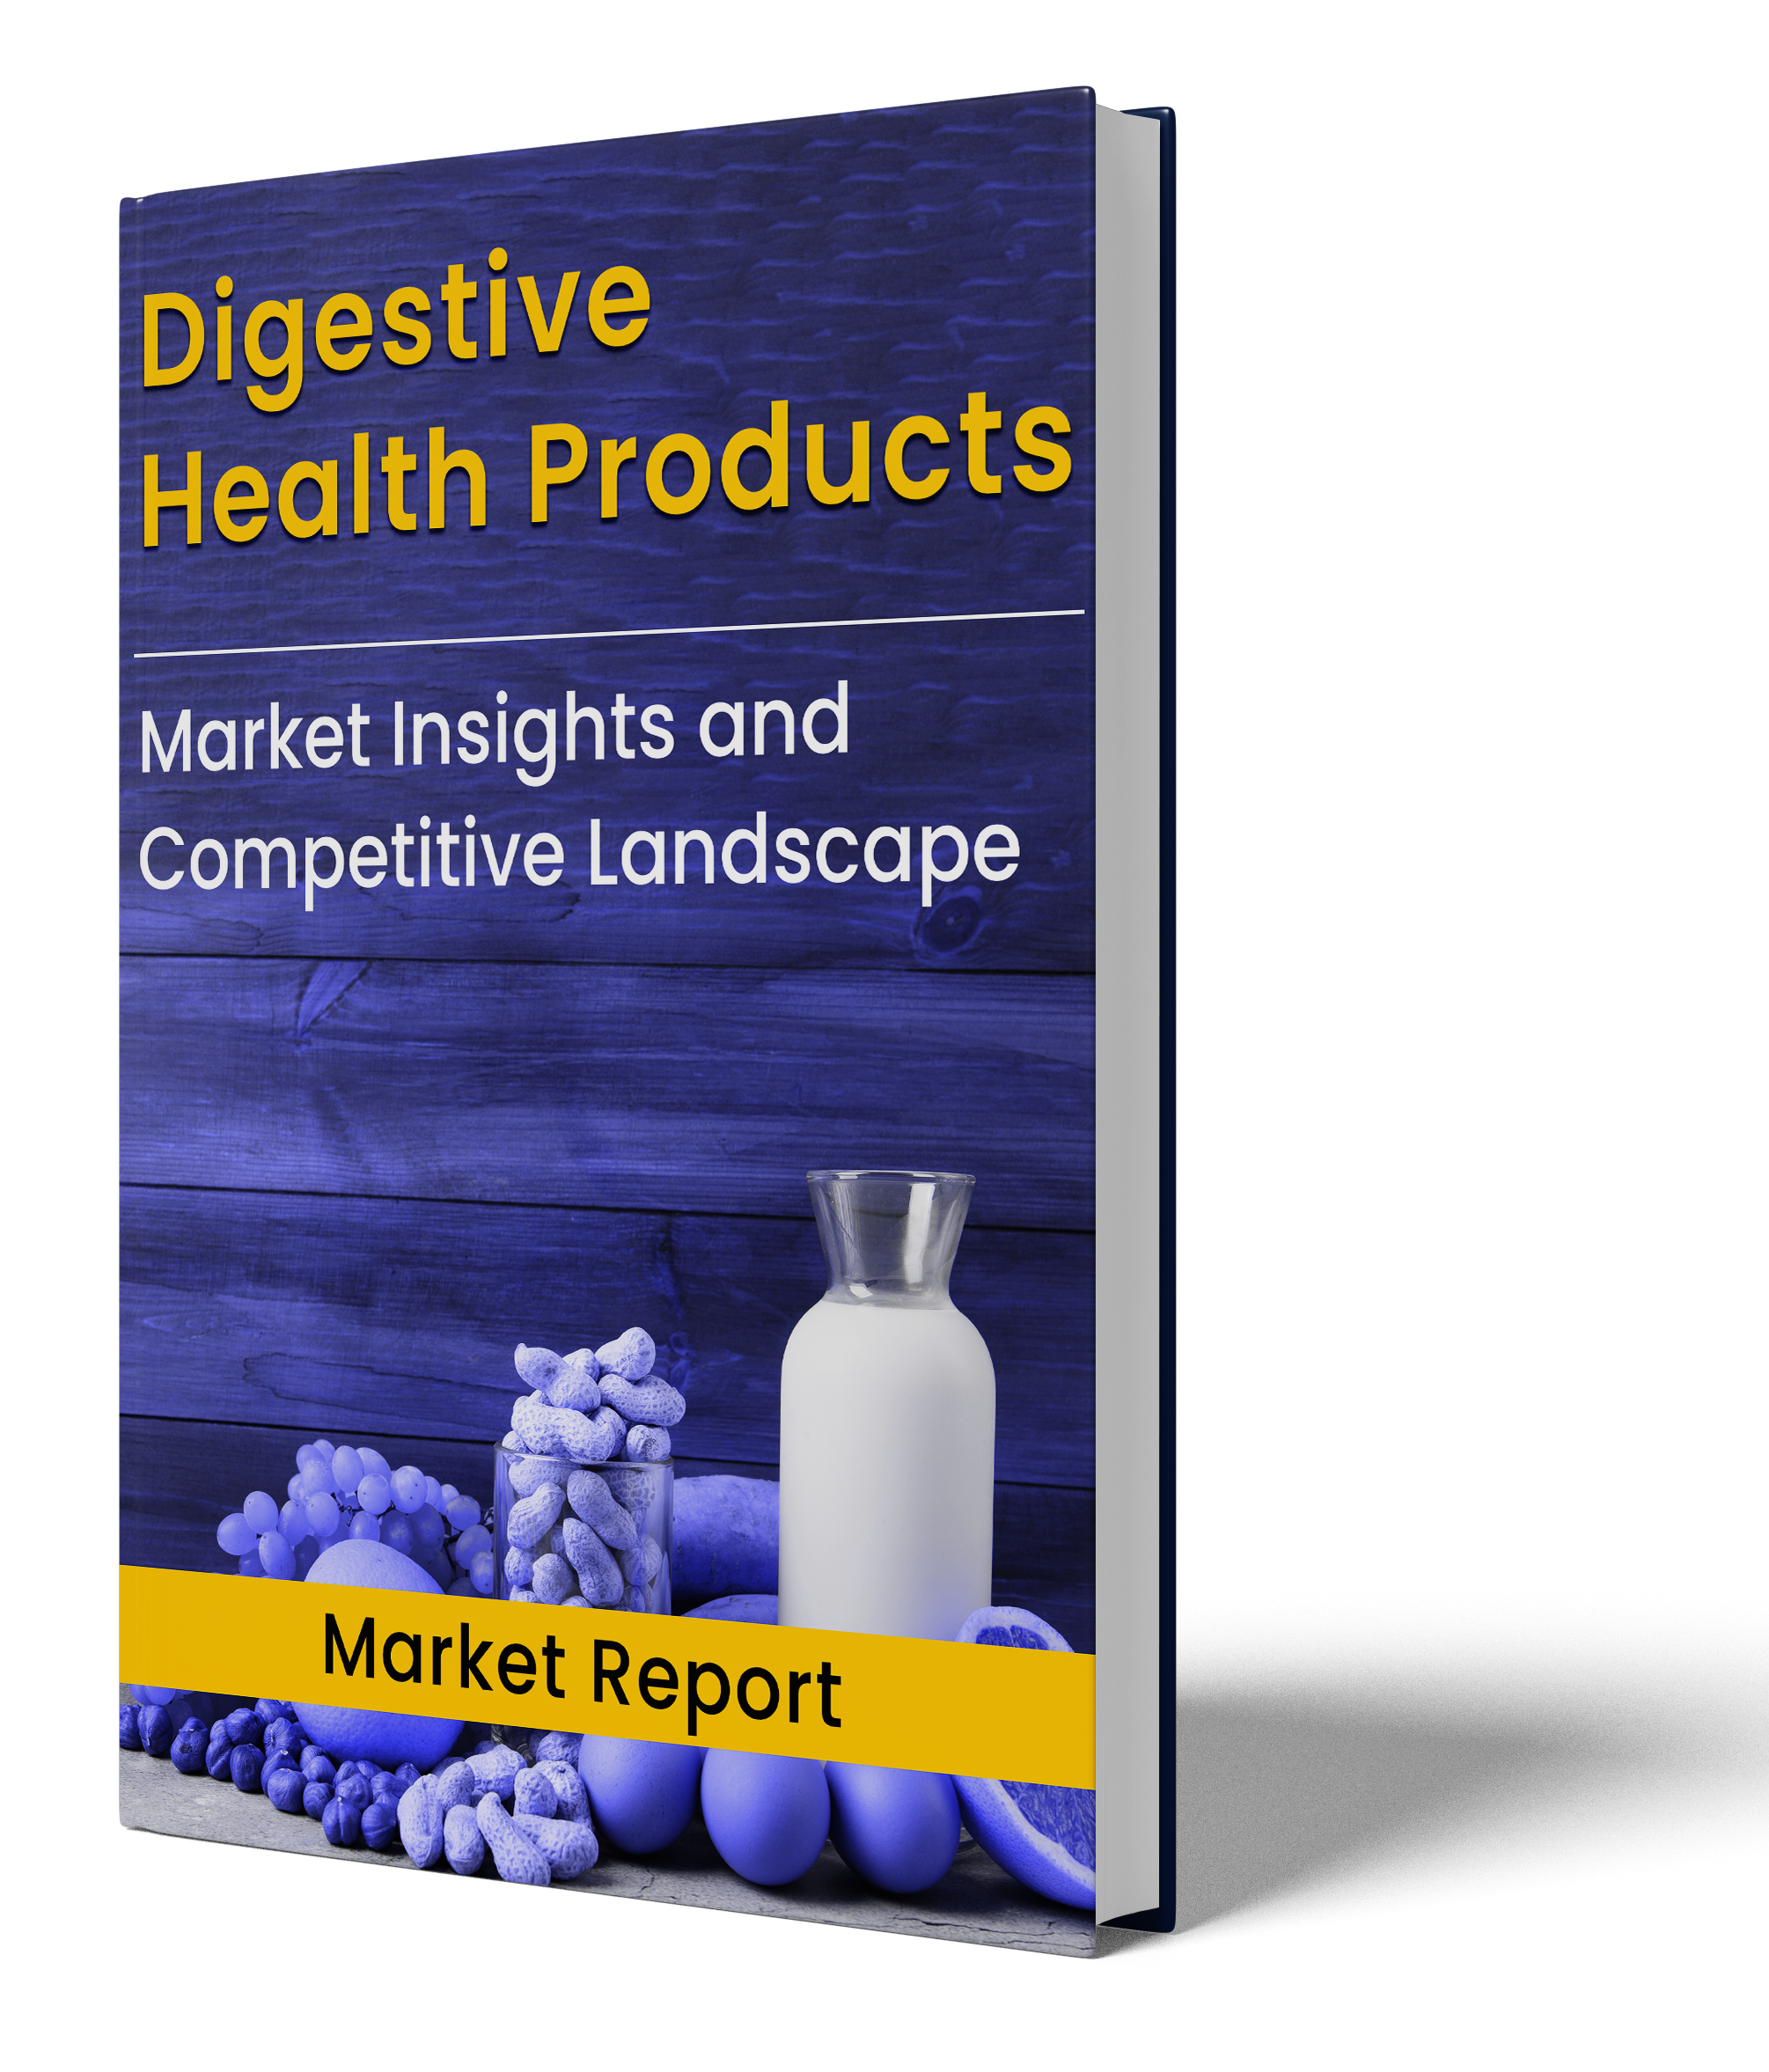 Digestive Health Products Market Report